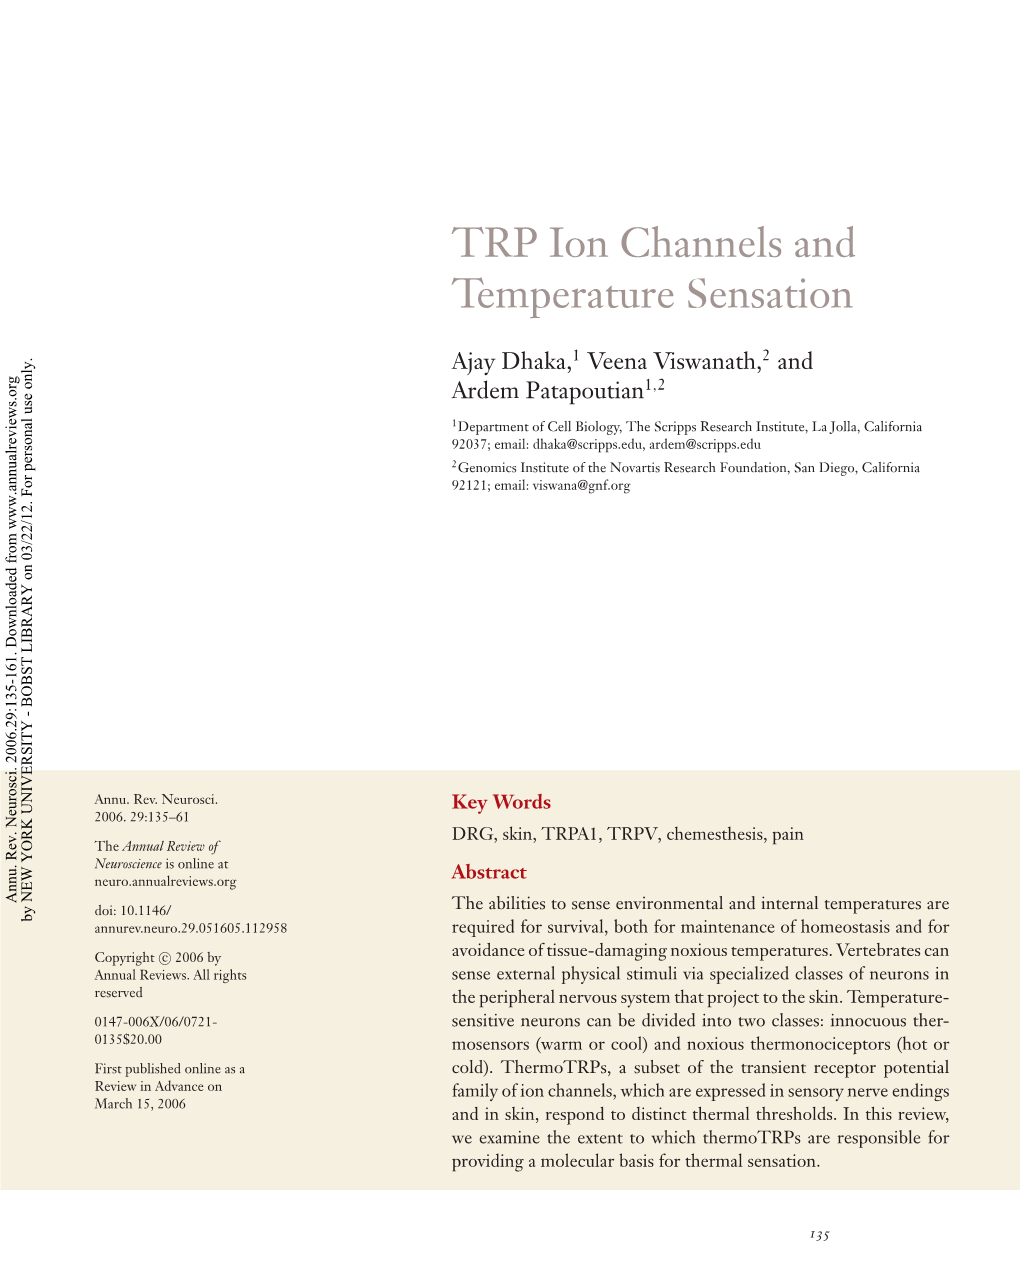 TRP Ion Channels and Temperature Sensation